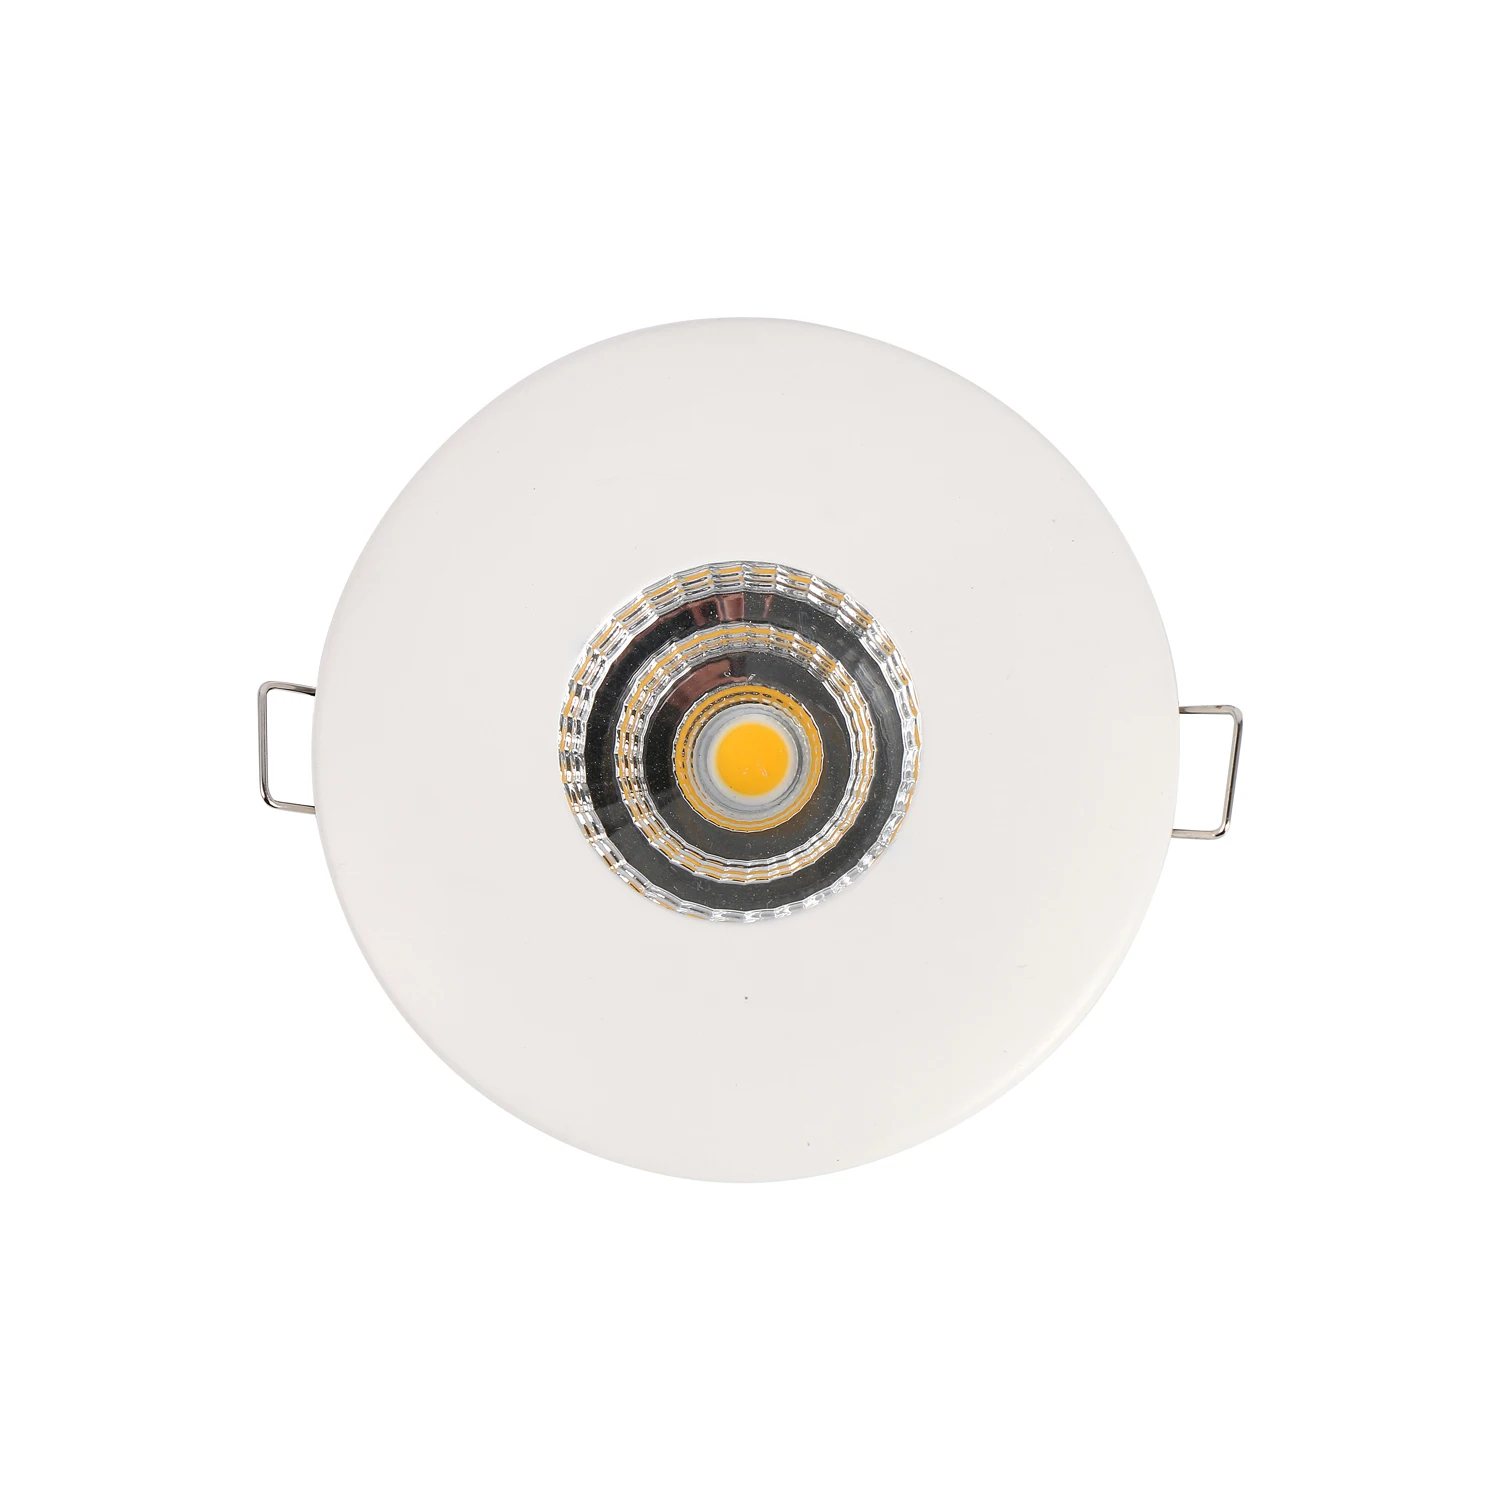 Magnetic Cover 3W COB Aluminum ROHS Ce Embeded 3-YEAR Reach EMC LVD LED Recessed Downlight Under Cabinet Light